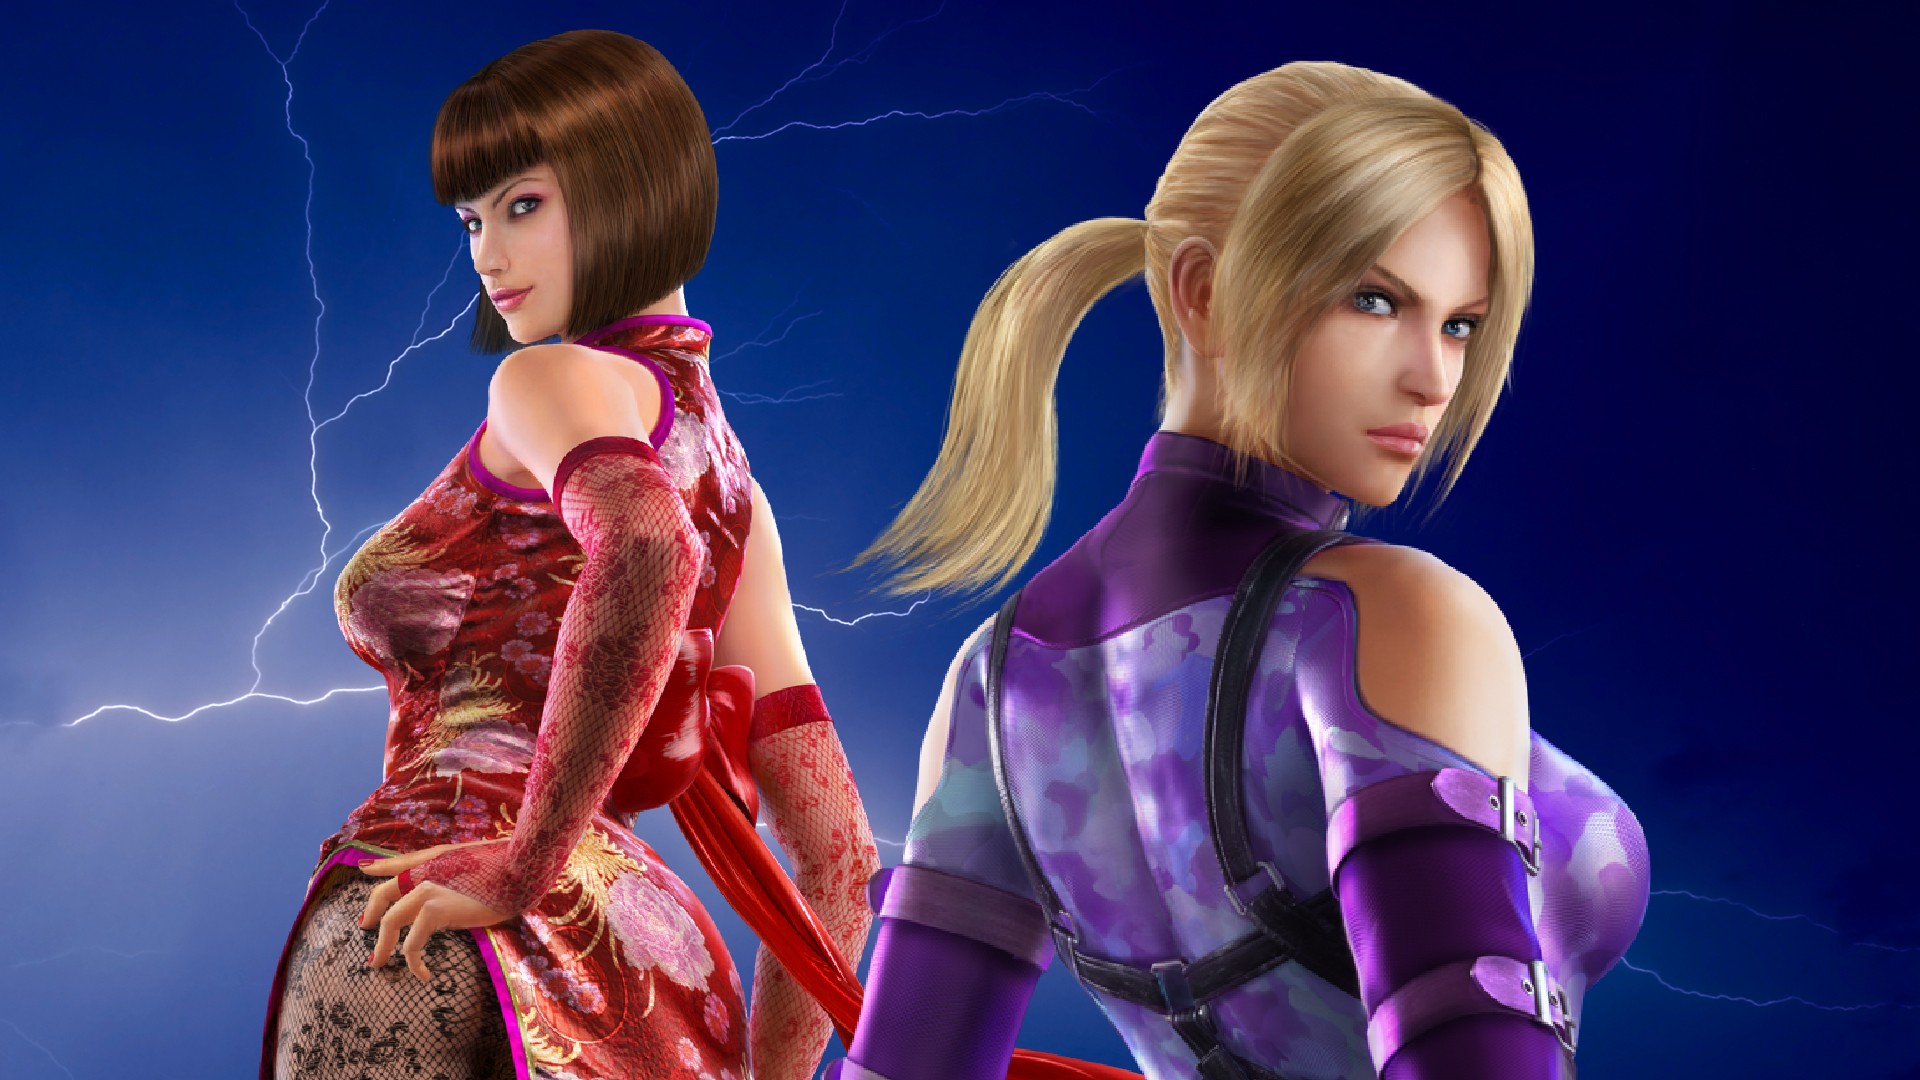 Tekken Image Tag HD Wallpaper And Background Photos